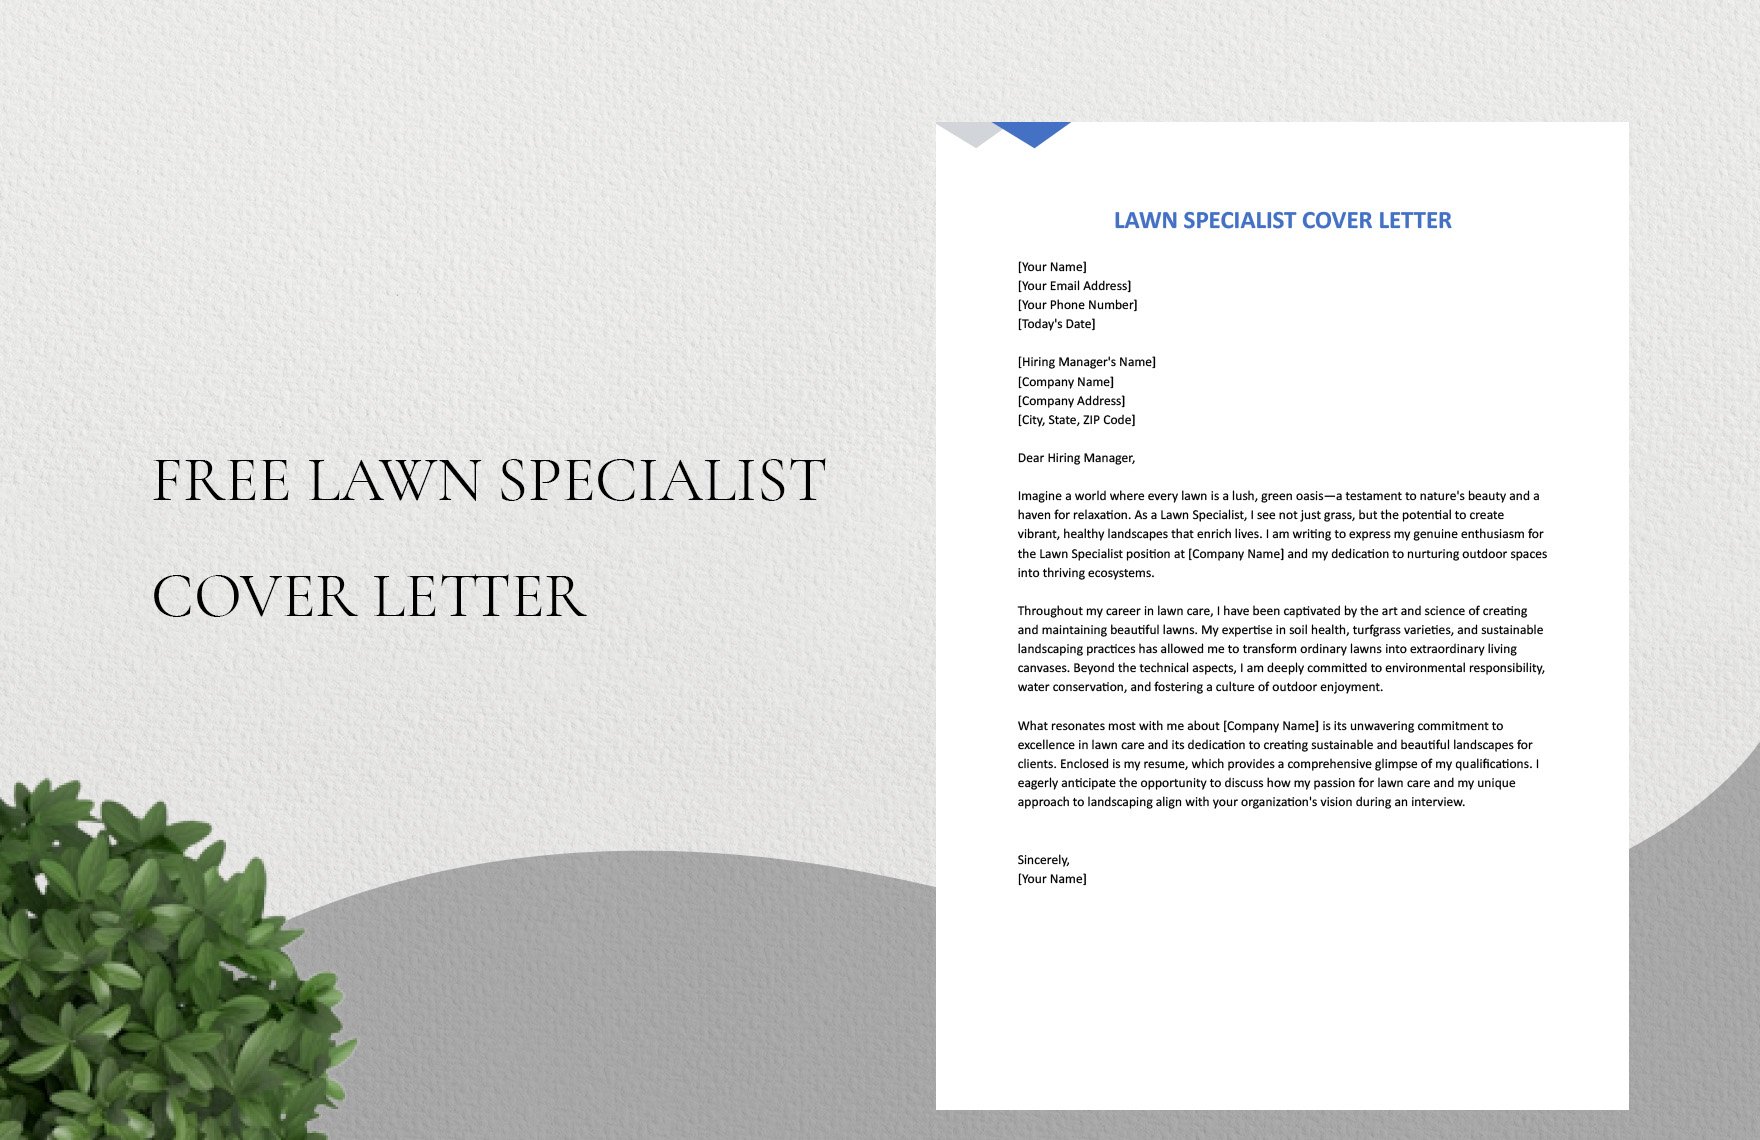 Lawn Specialist Cover Letter